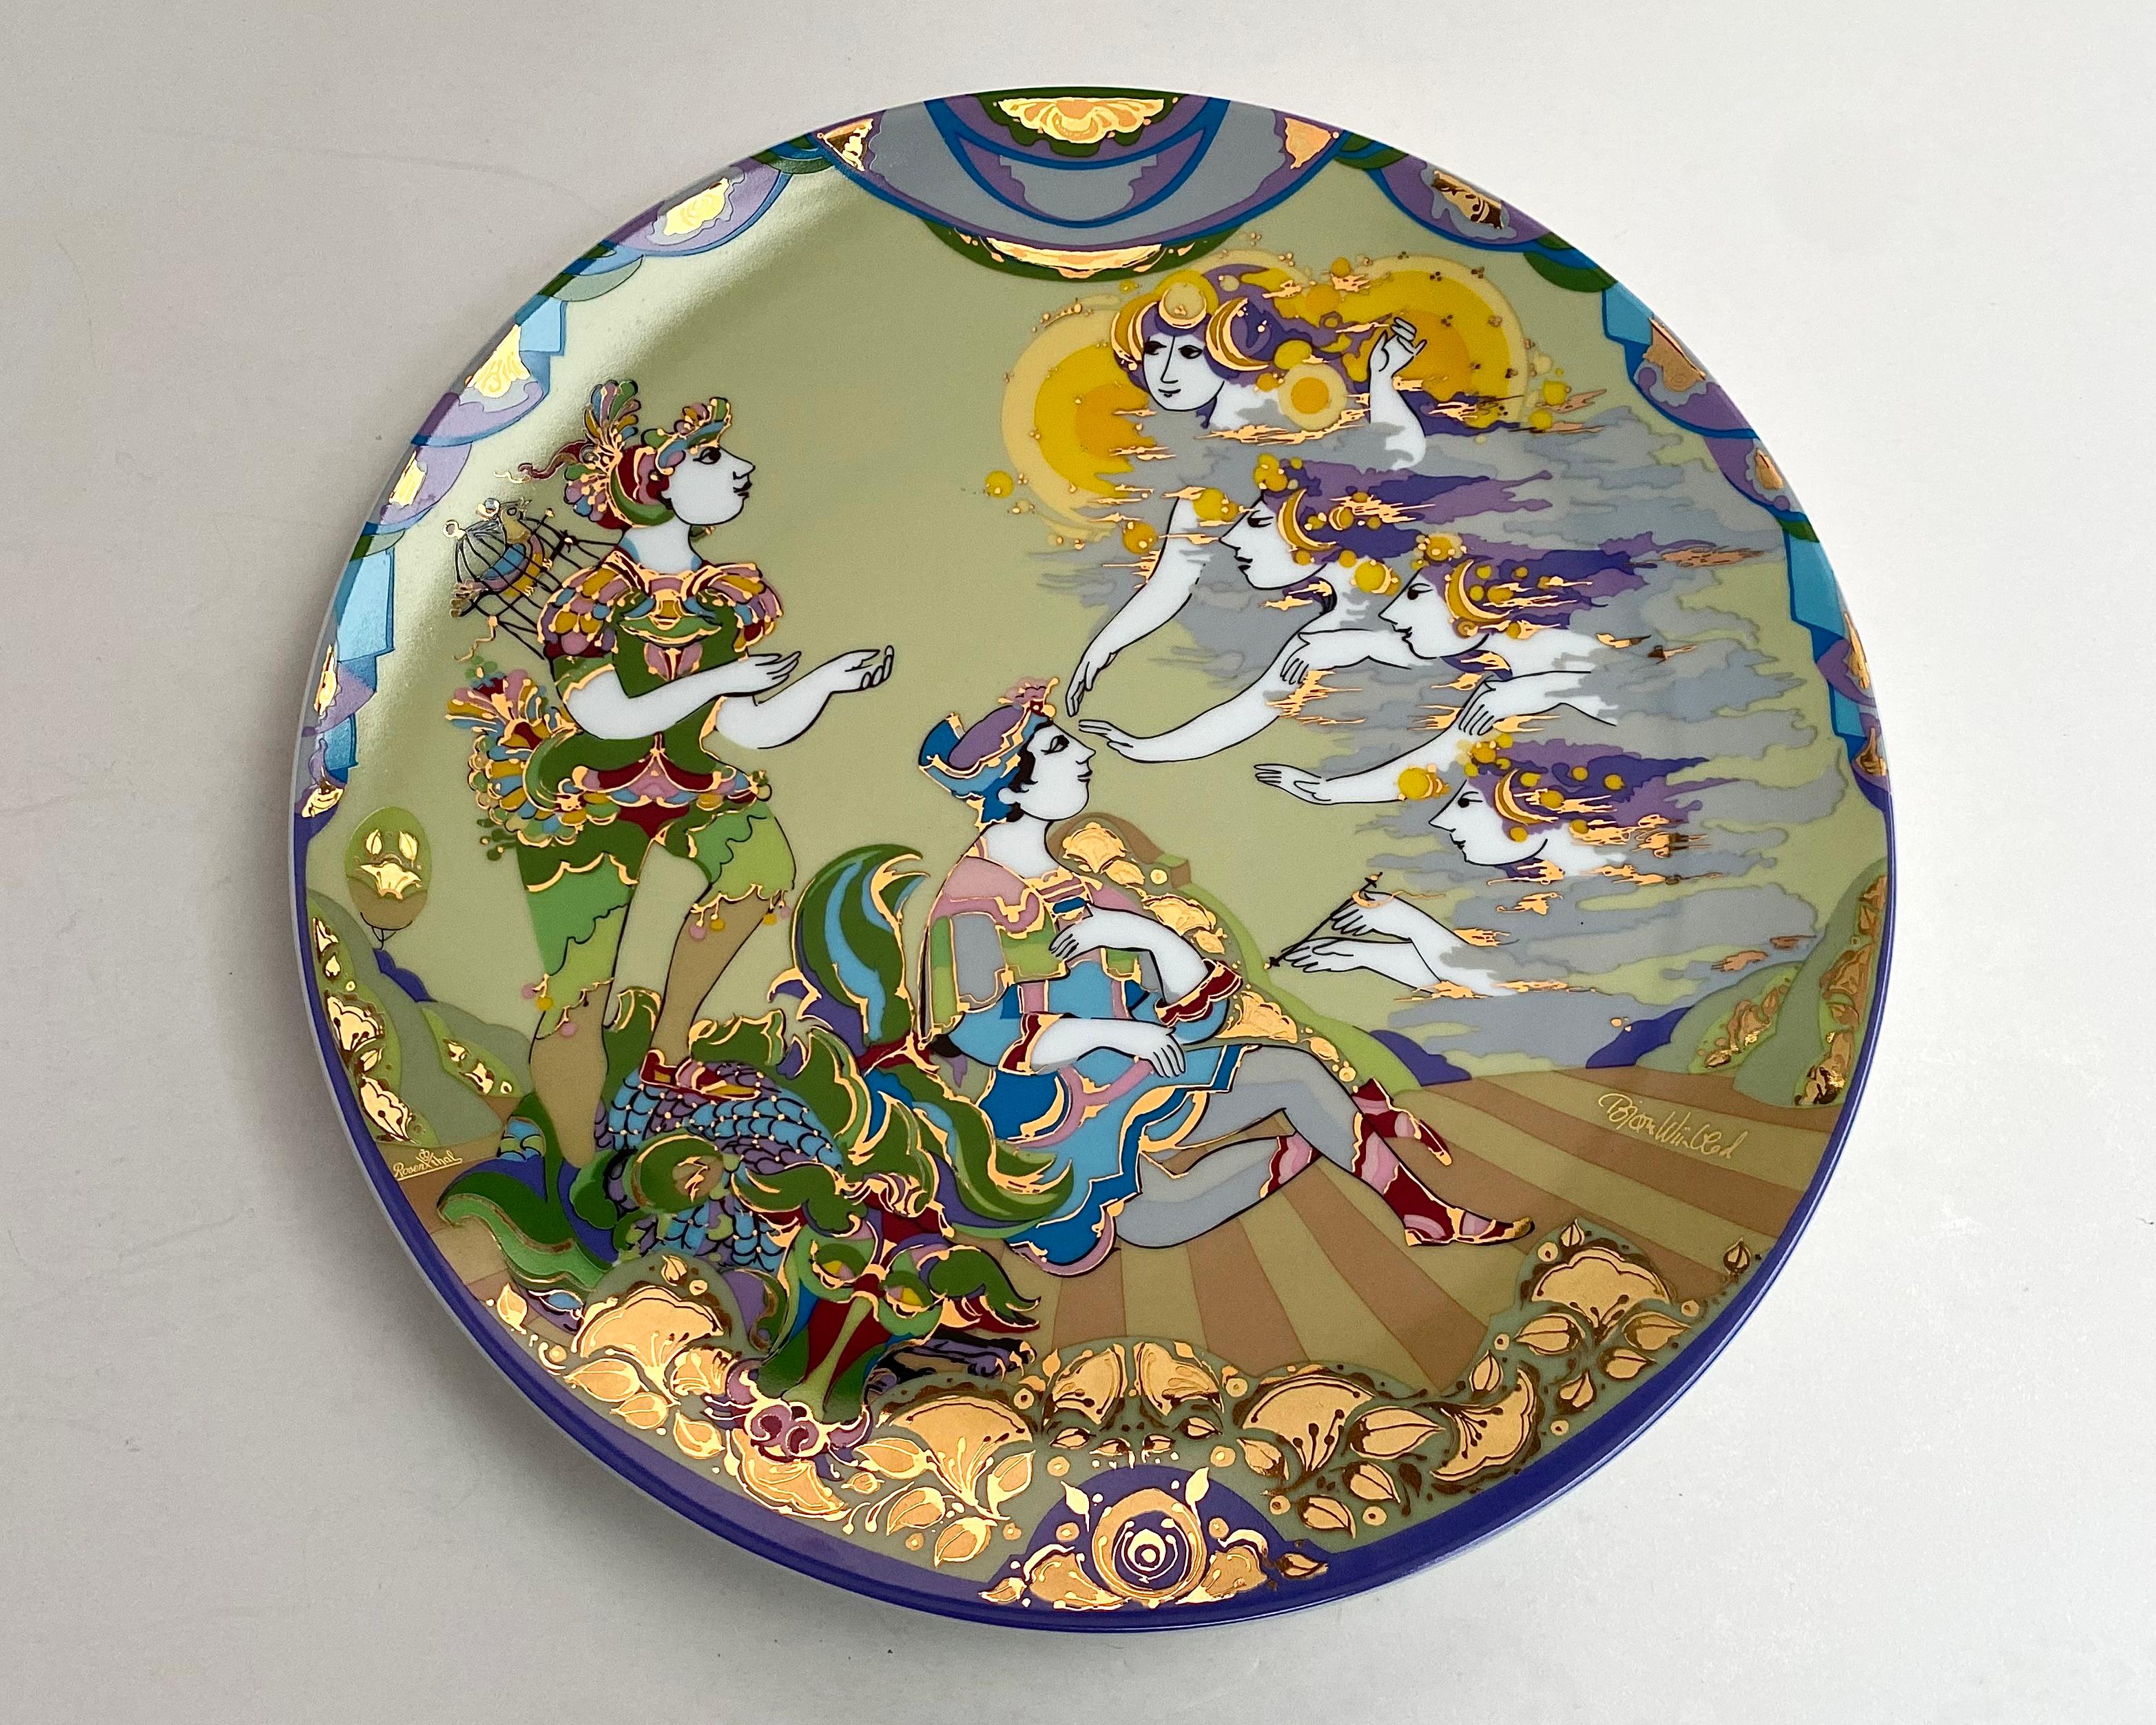 This amazing collector plate from Rosenthal Studio Line features a beautiful design inspired by Mozart's 